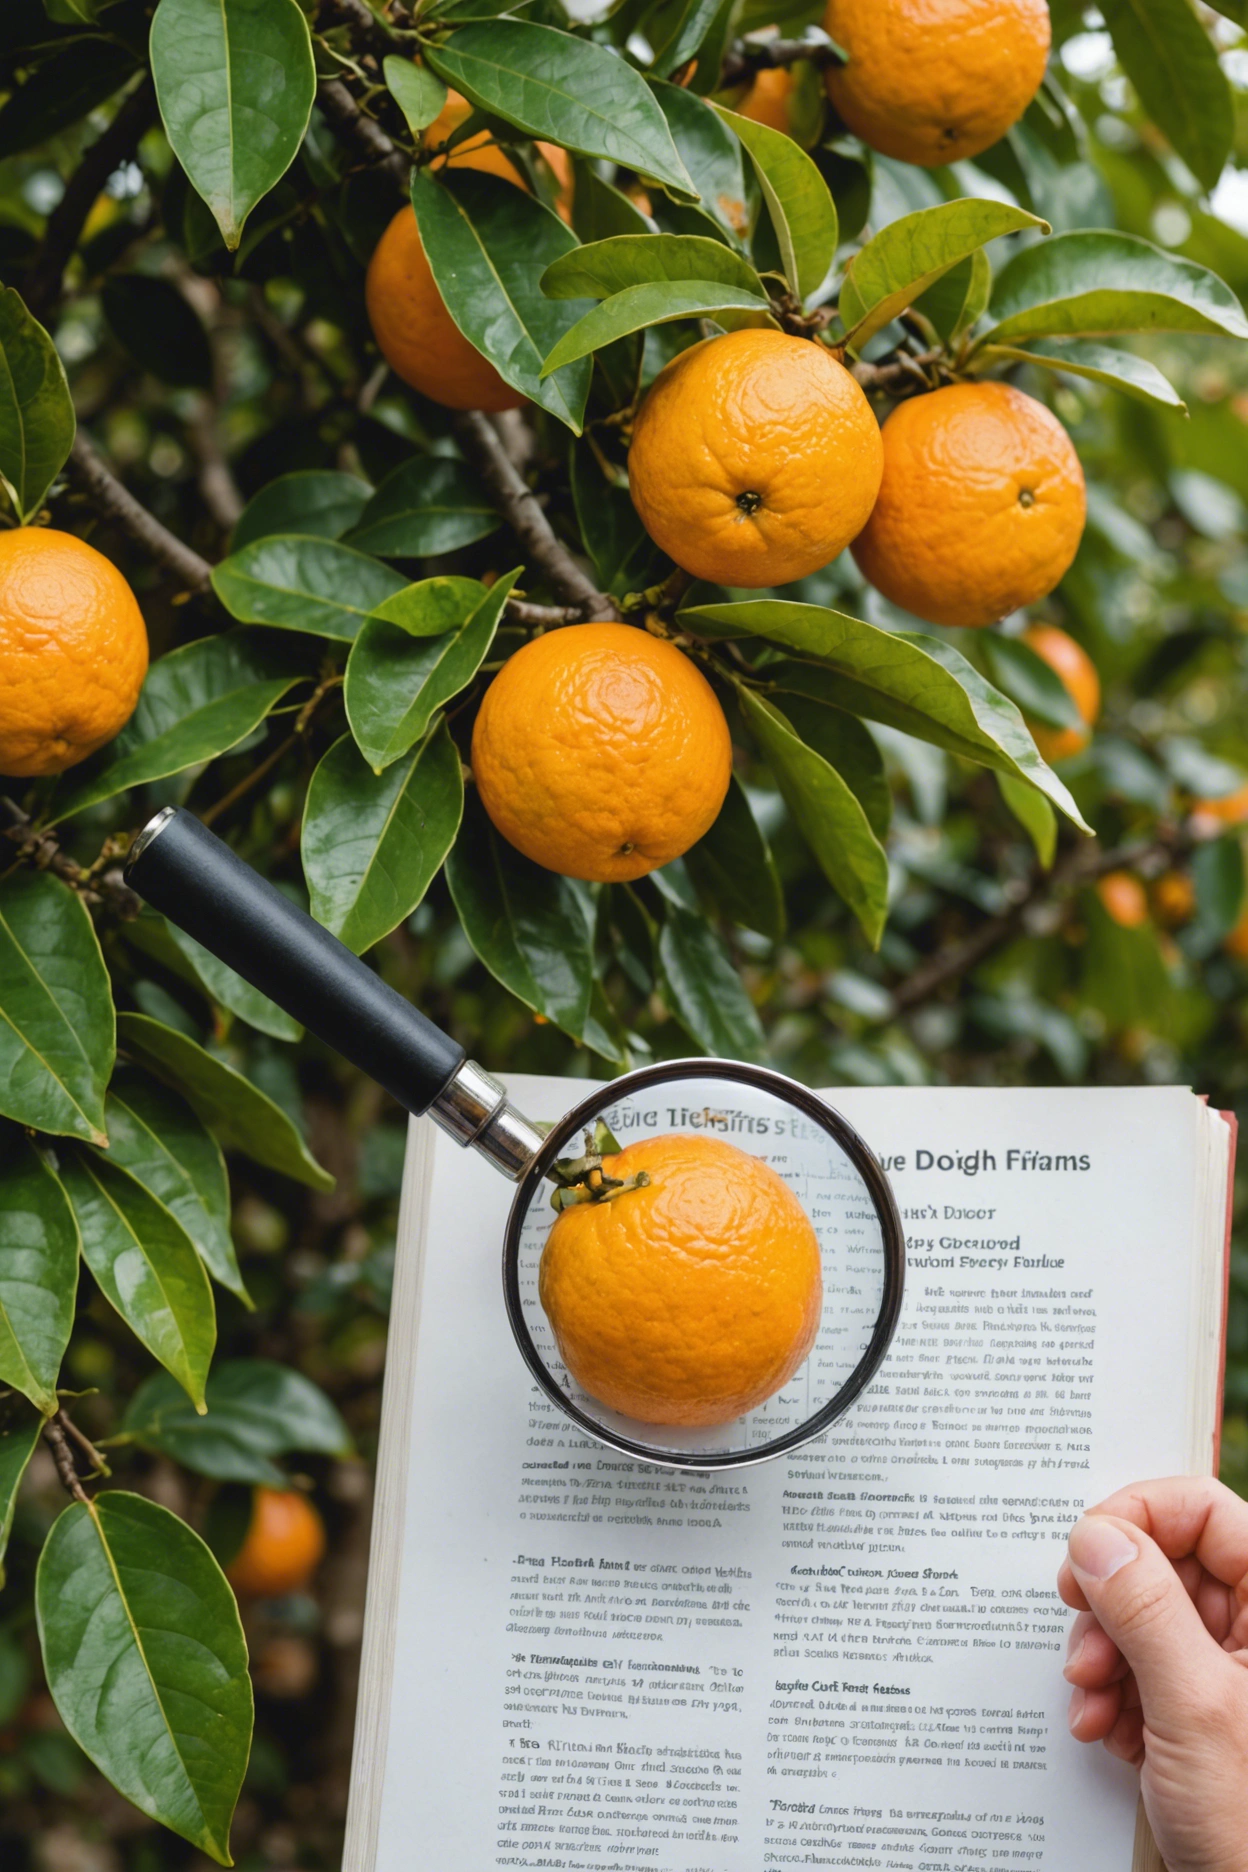 "Close-up of a distressed orange tree with fallen leaves and discolored fruit, magnifying glass examining a leaf, and a citrus care guide book nearby."